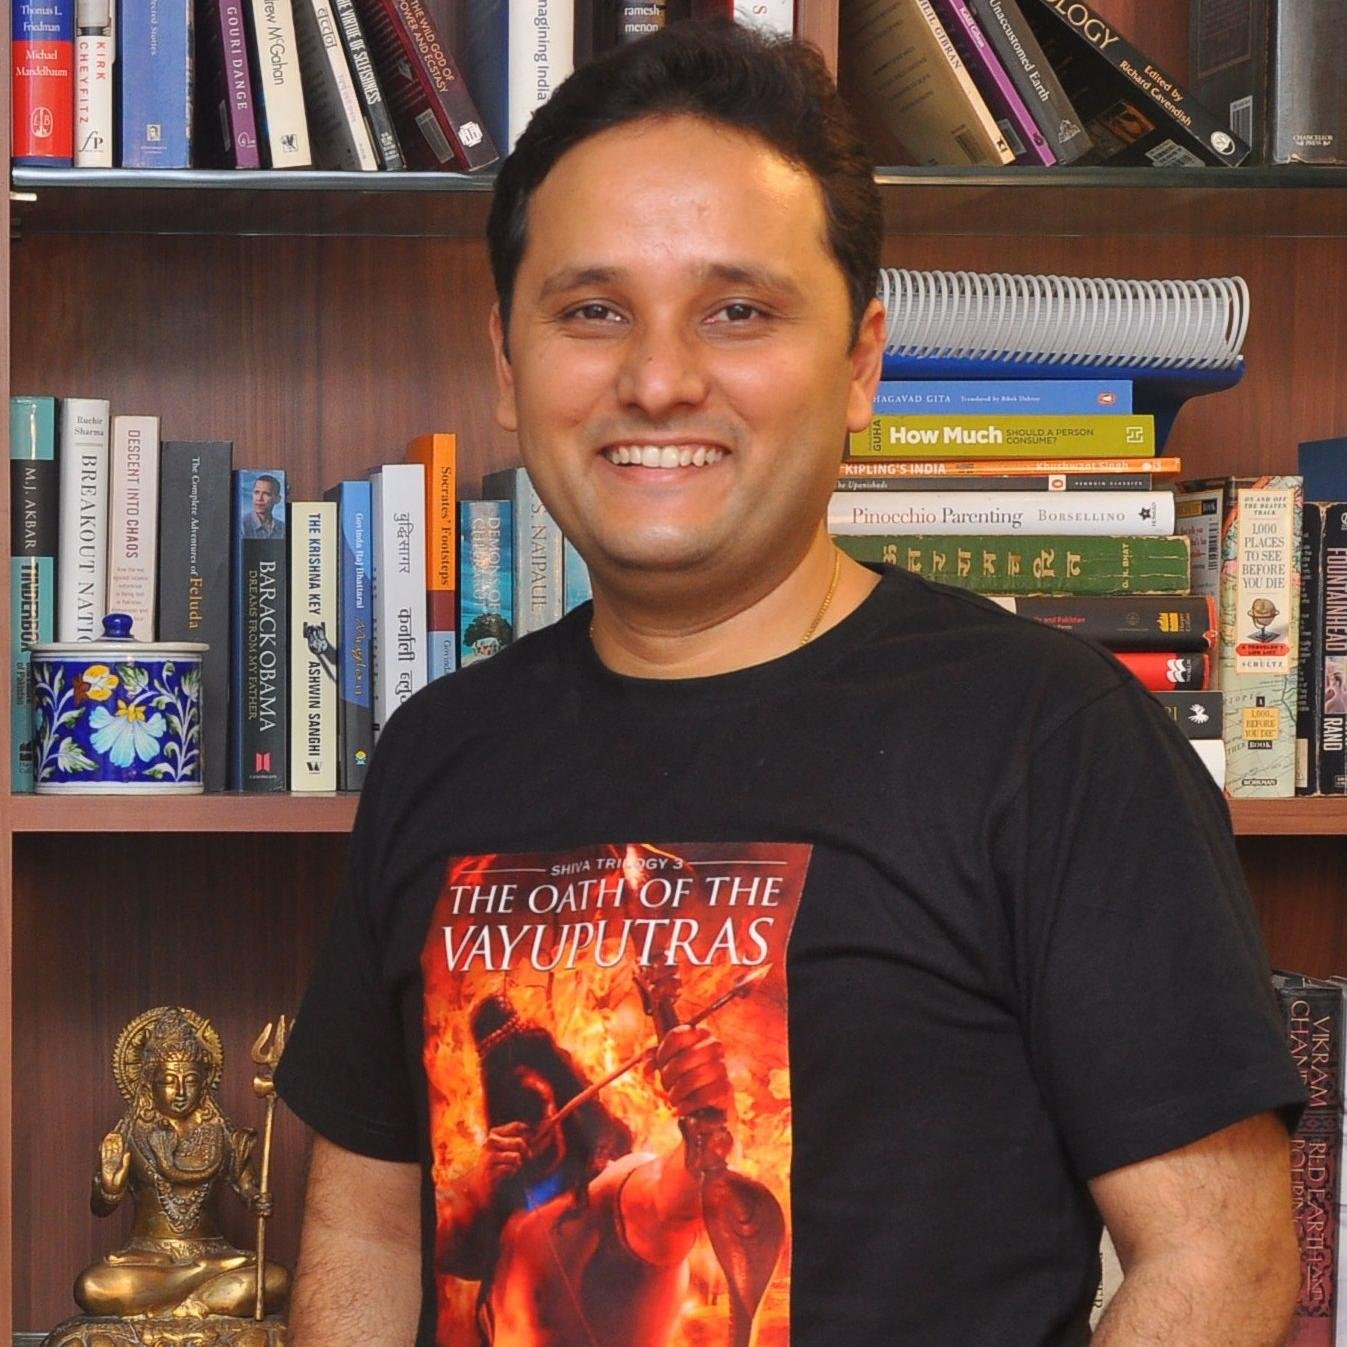 Guys, I am now tweeting from @authoramish. Please follow me there - Amish